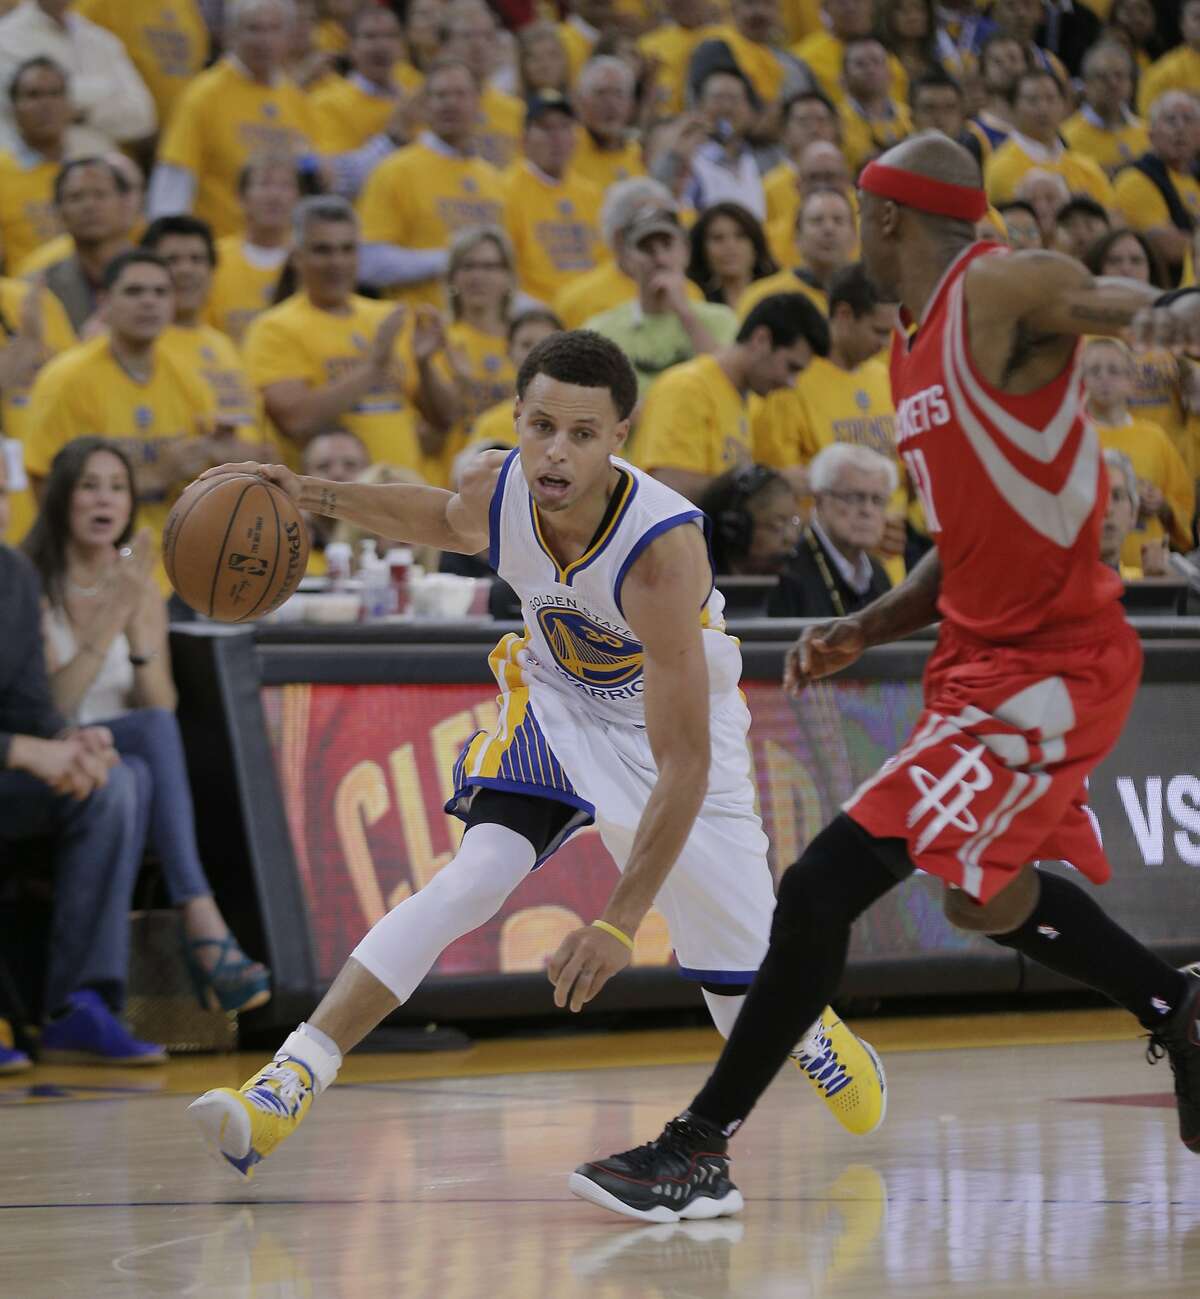 Steph Curry's Parents Reportedly Accuse Each Other Of Cheating